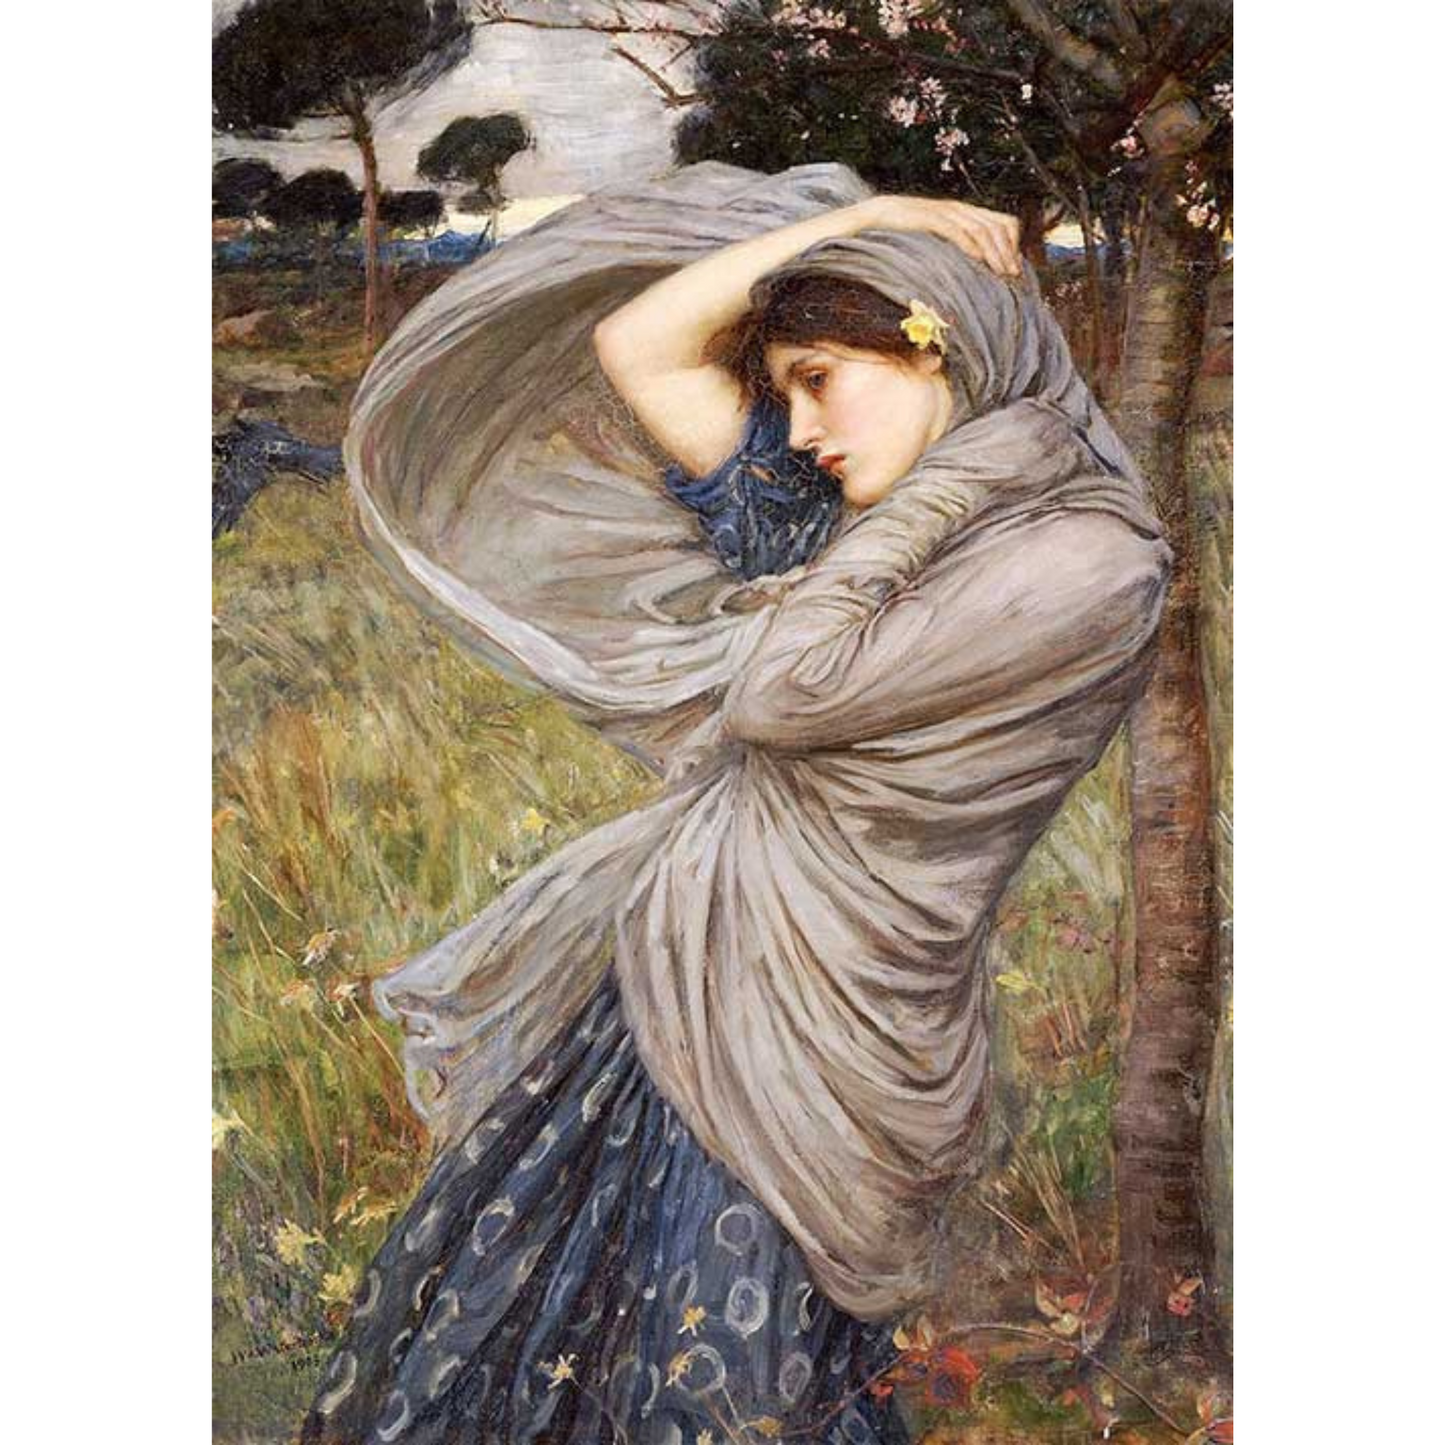 "Boreas" by John Waterhouse - Artwork 0106. Decoupage rice paper reproduction print by Paper Designs available at Milton's Daughter.